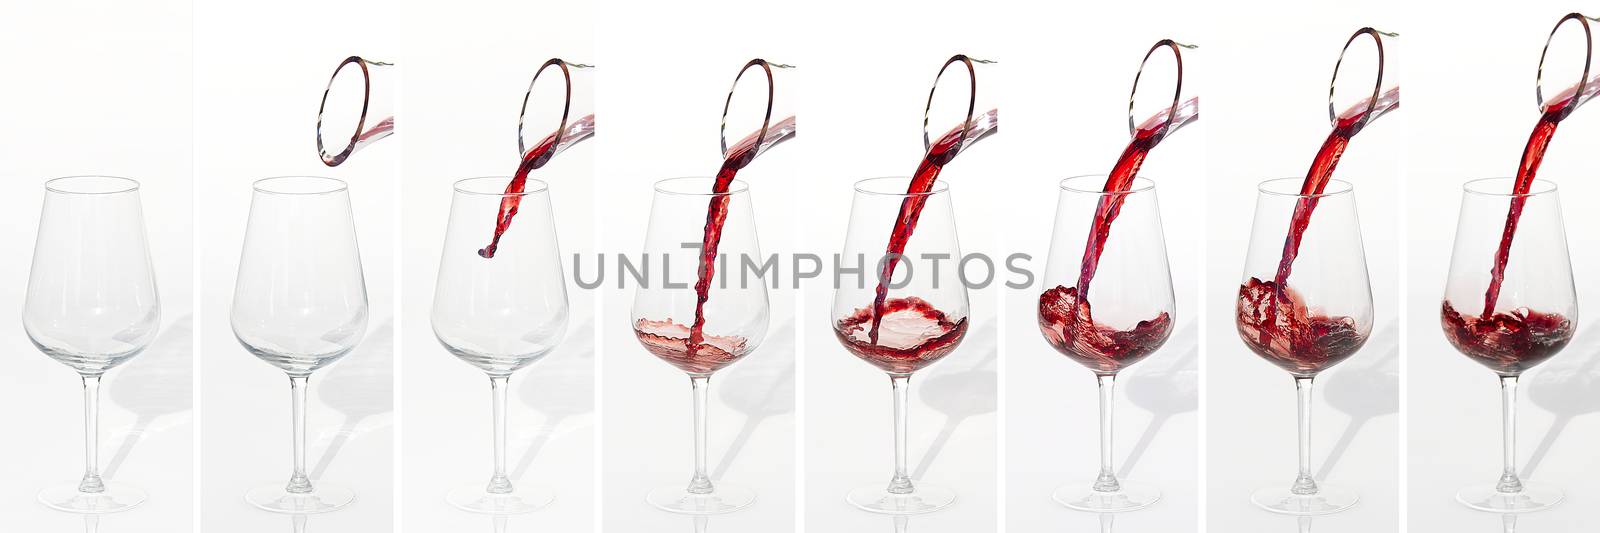 Sommelier pours red wine from decanter to wineglass on white bac by PhotoTime